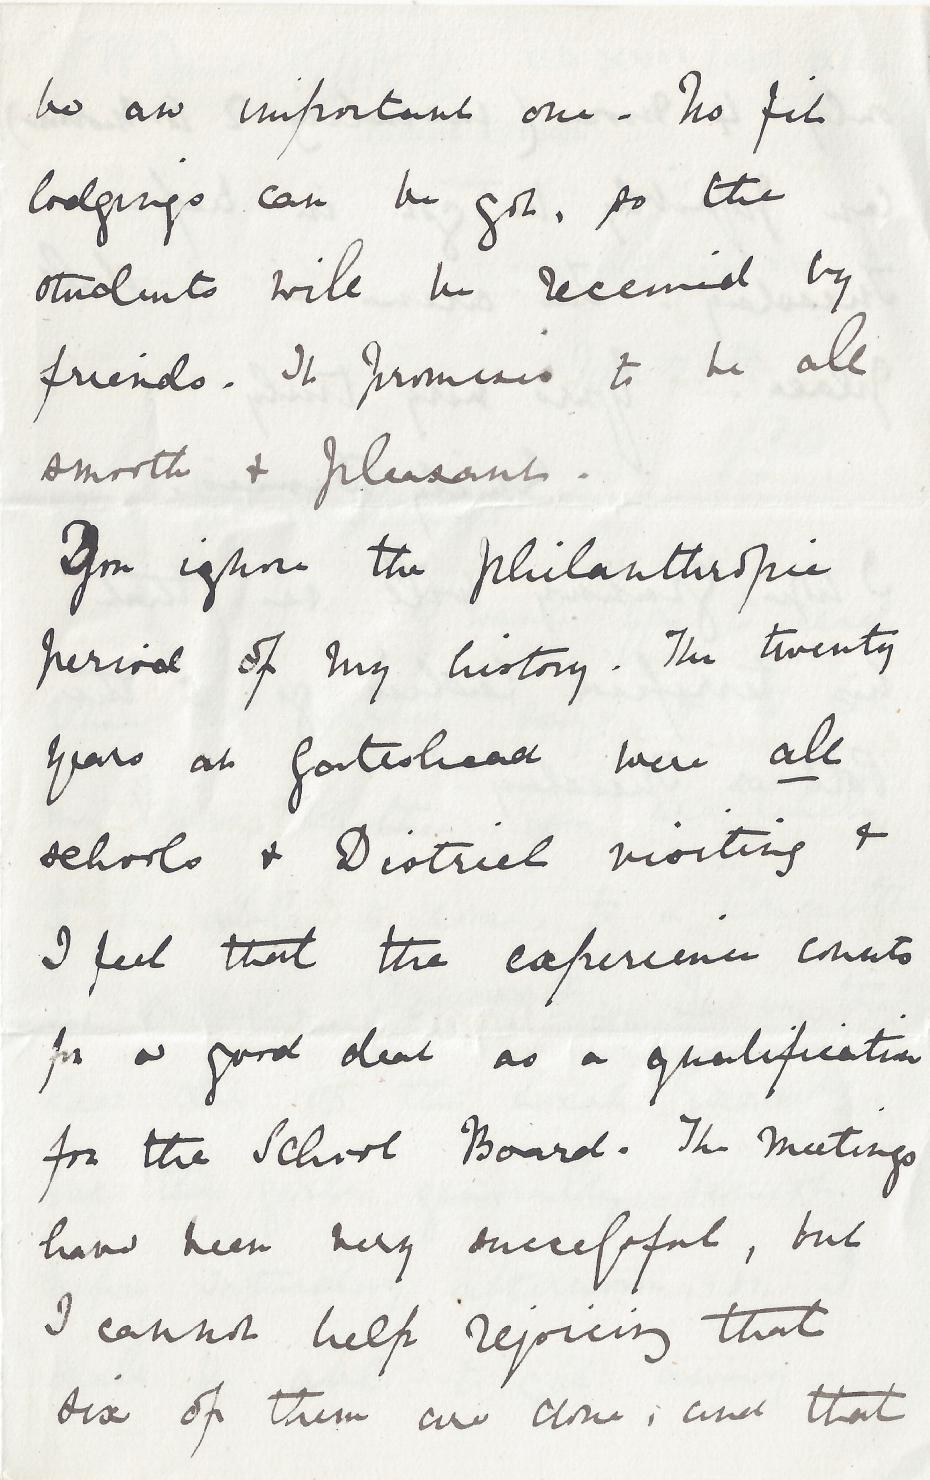 Part of a letter from Emily to Henry Tomkinson, 25 November 1870.  Emily describes the suitability of her candidacy for the London School Board: ‘You ignore the philanthropic period of my history. The twenty years at Gateshead were all schools and District visiting and I feel that the experience counts for a good deal as a qualification for the School Board’ (archive reference: GCPP Davies 15/1/5/6pt).